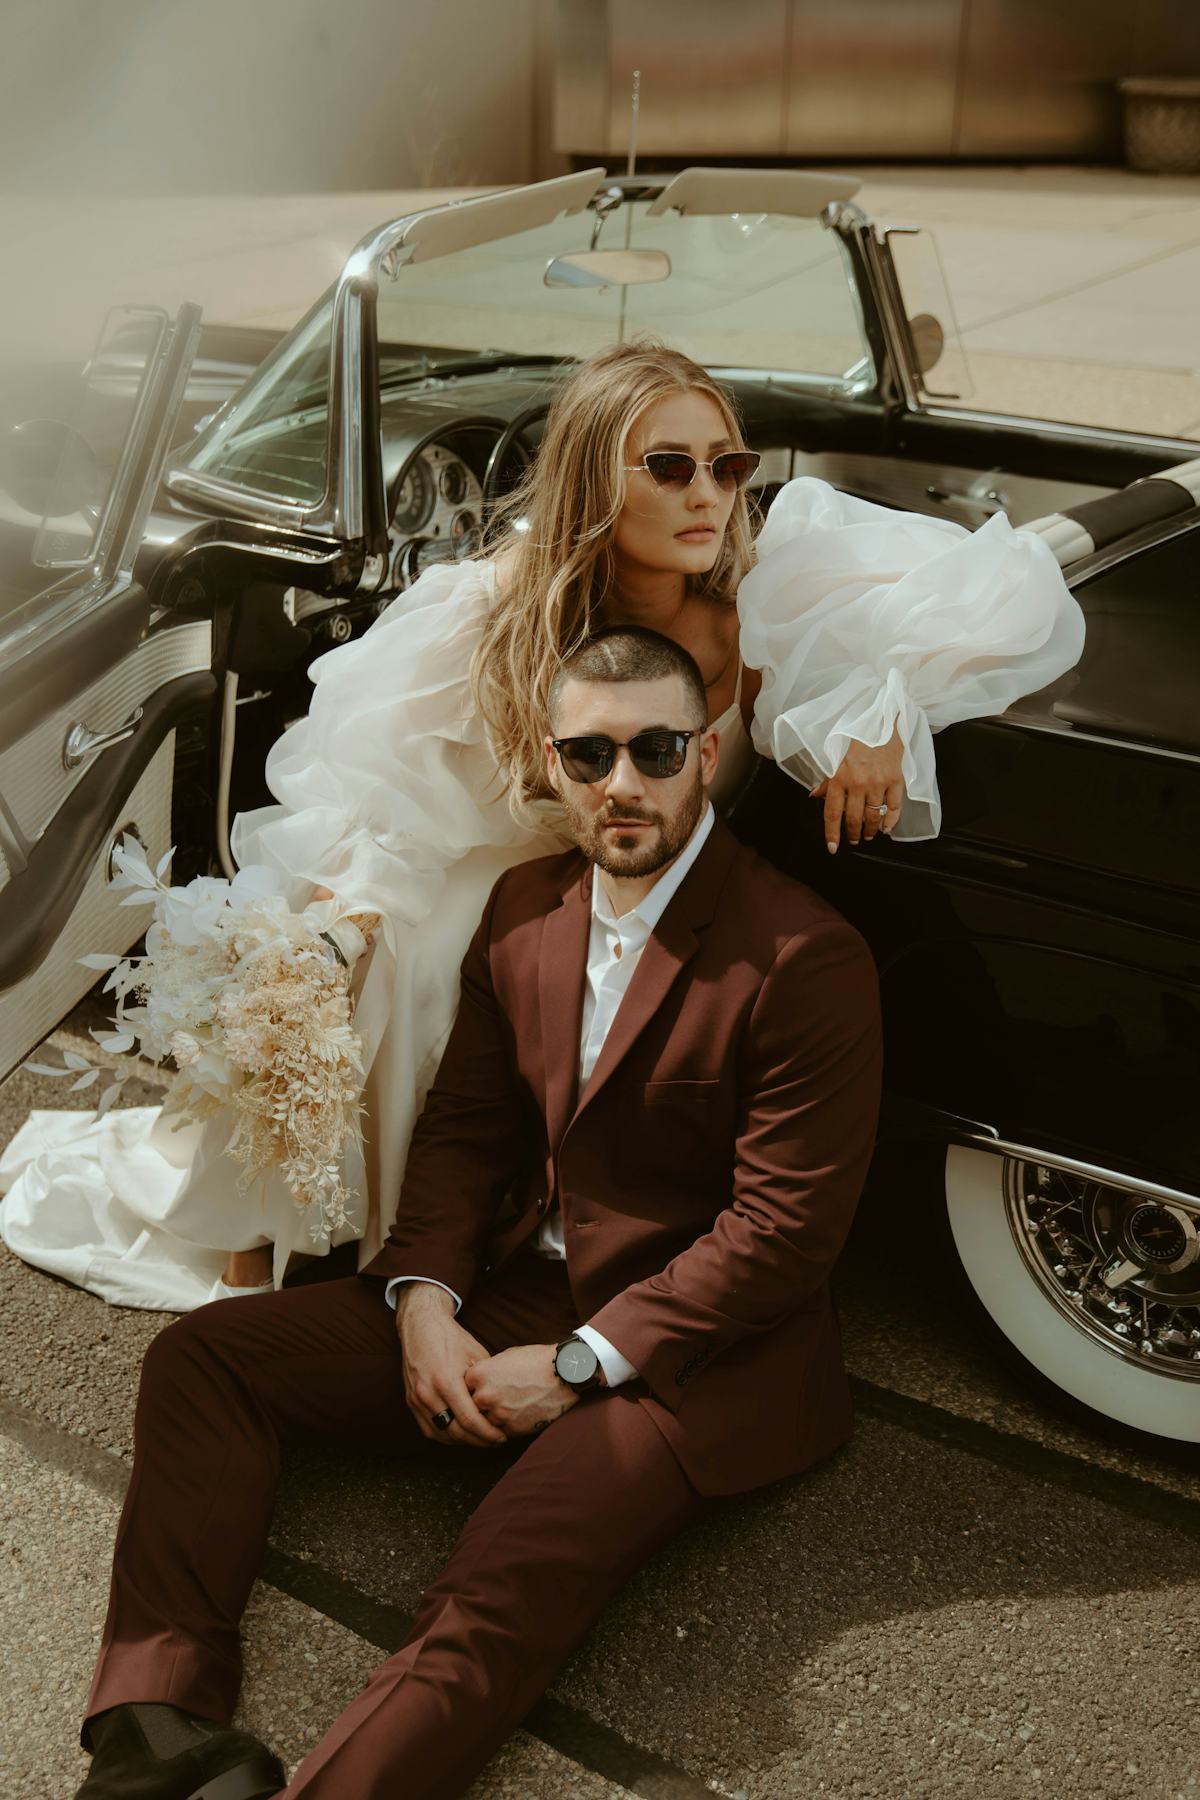 Alternative couple with an edgy wedding day sporting a maroon suit, dreamy, puffy sleeve dress posing with a vintage car.